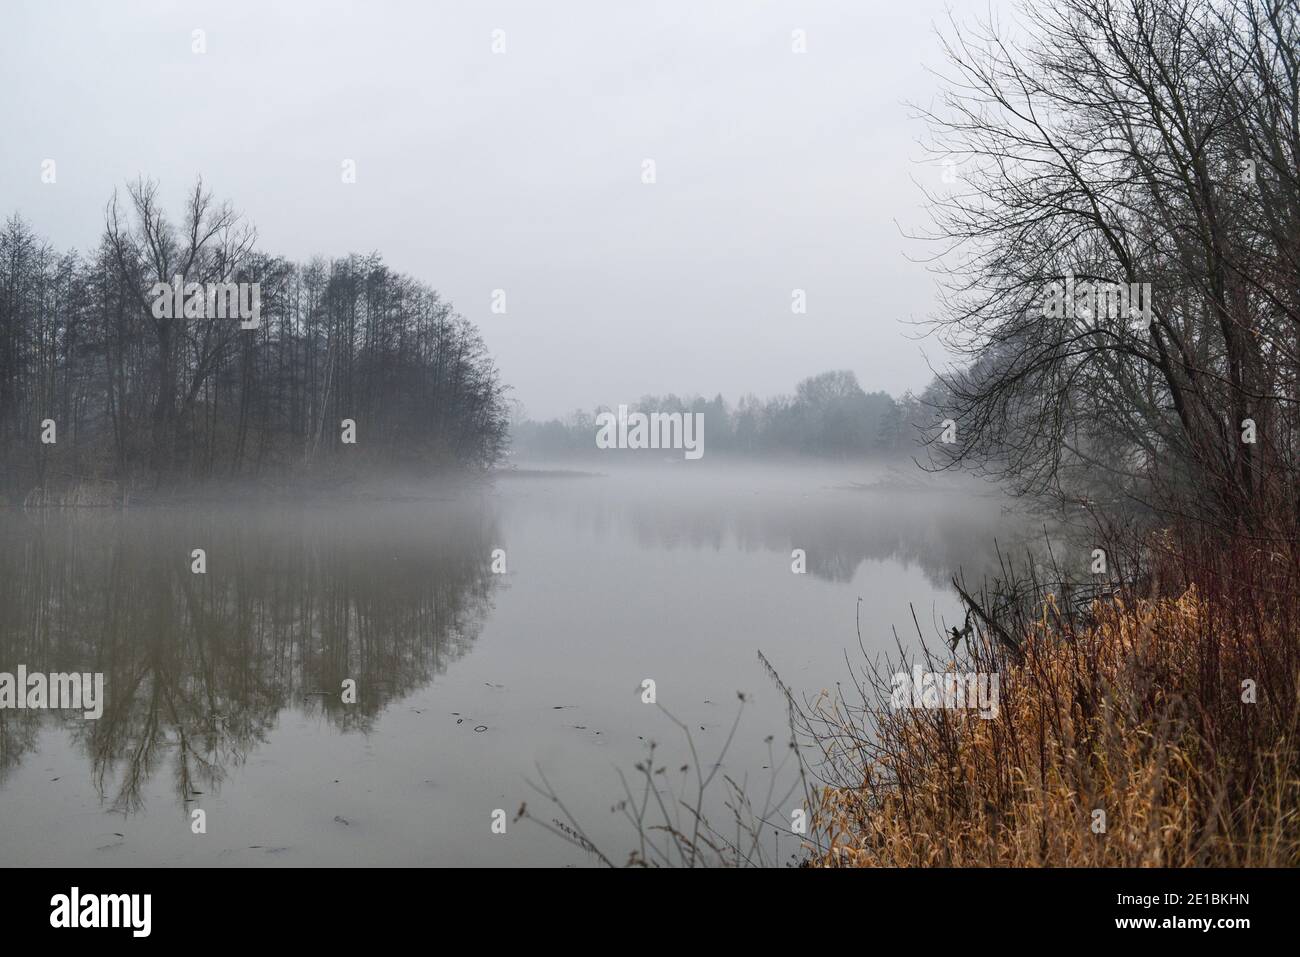 Autumn landscape. Foggy day over the waterline. Stock Photo